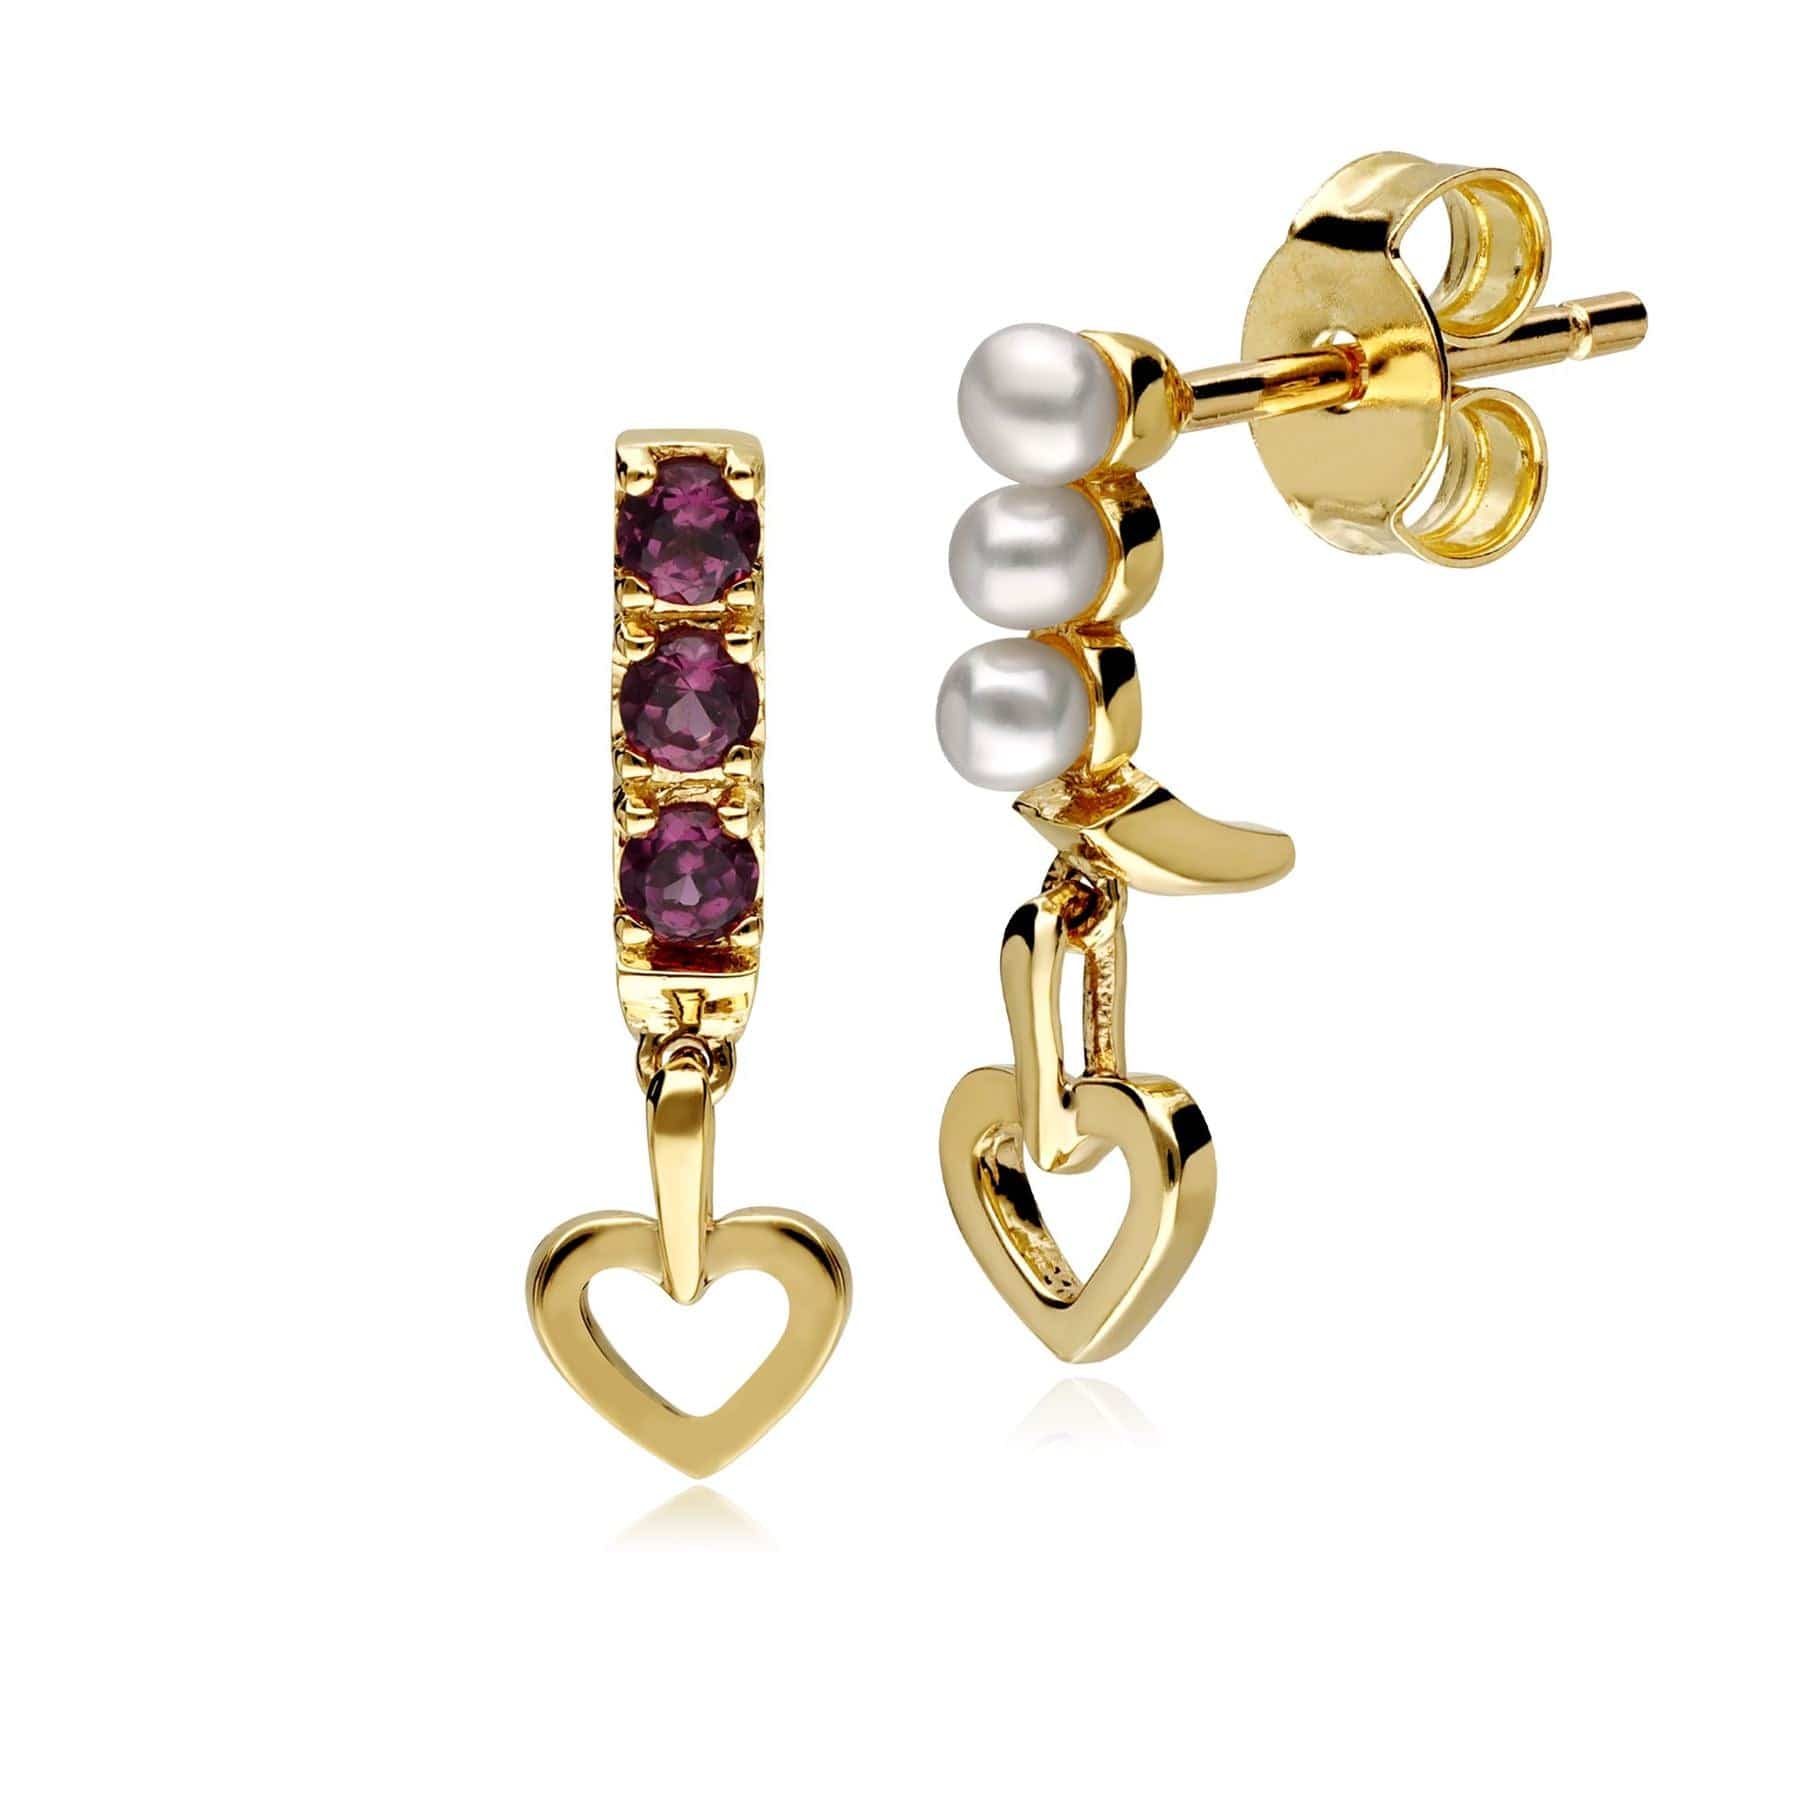 Cultured Freshwater Pearl & Rhodolite Mismatched Heart Drop Earrings In 9ct Yellow Gold - Gemondo